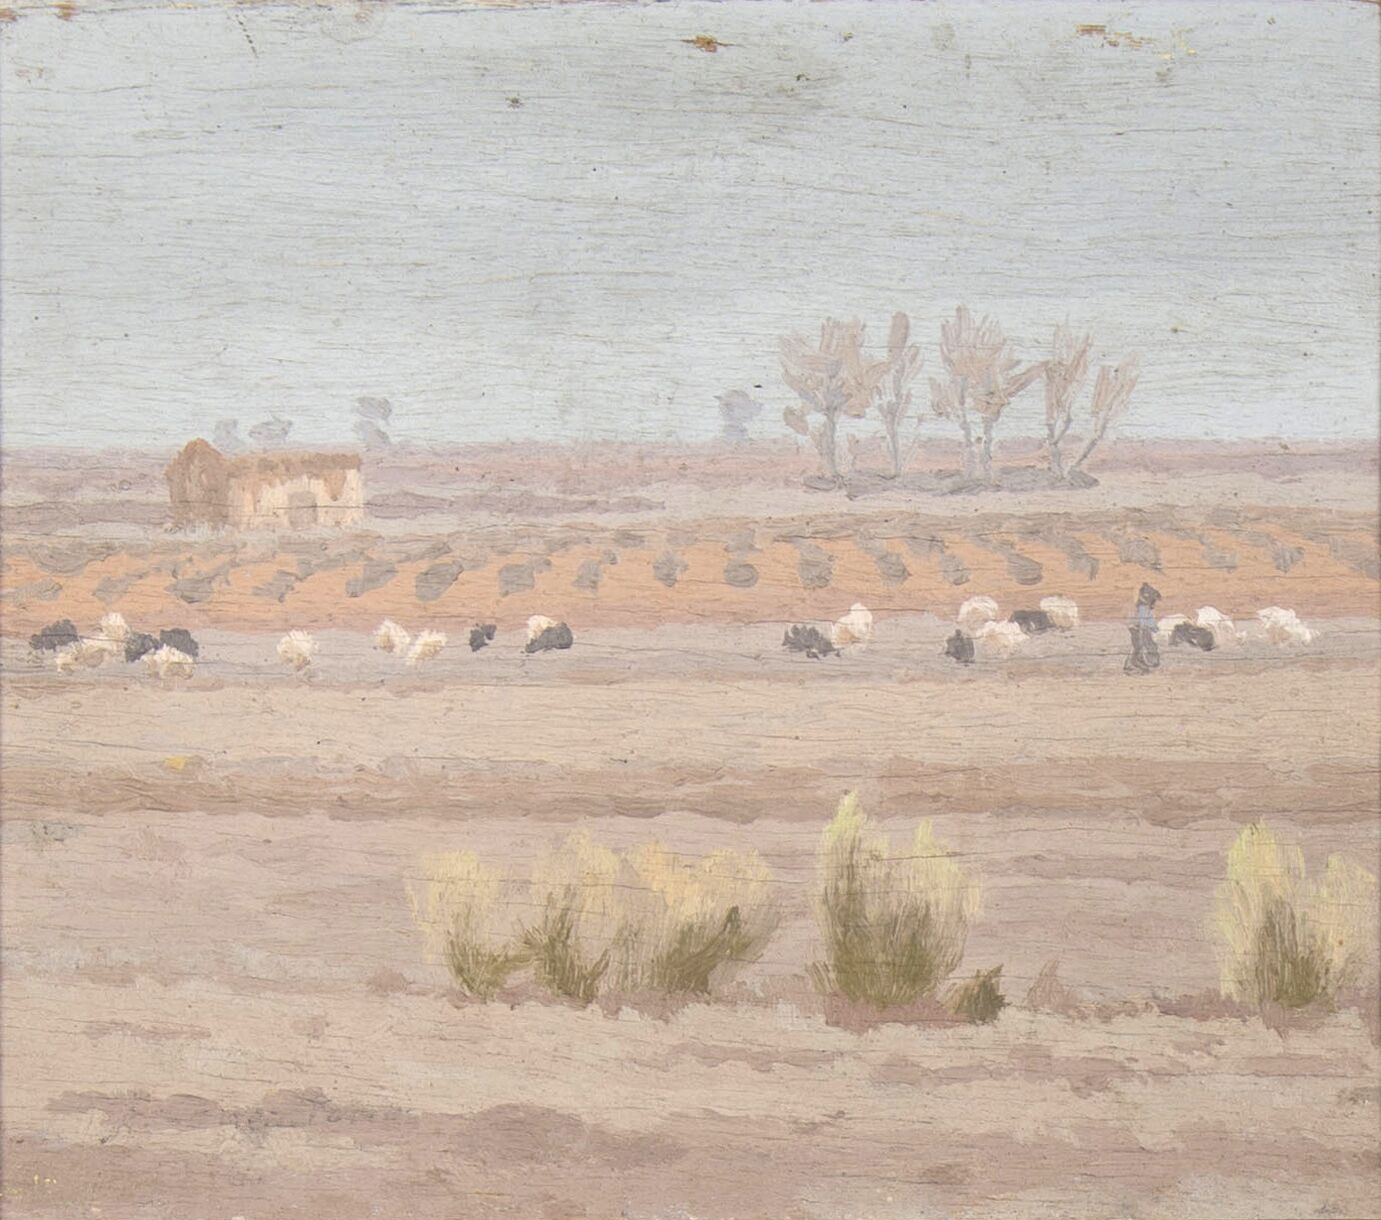 Winter landscape with a cattle